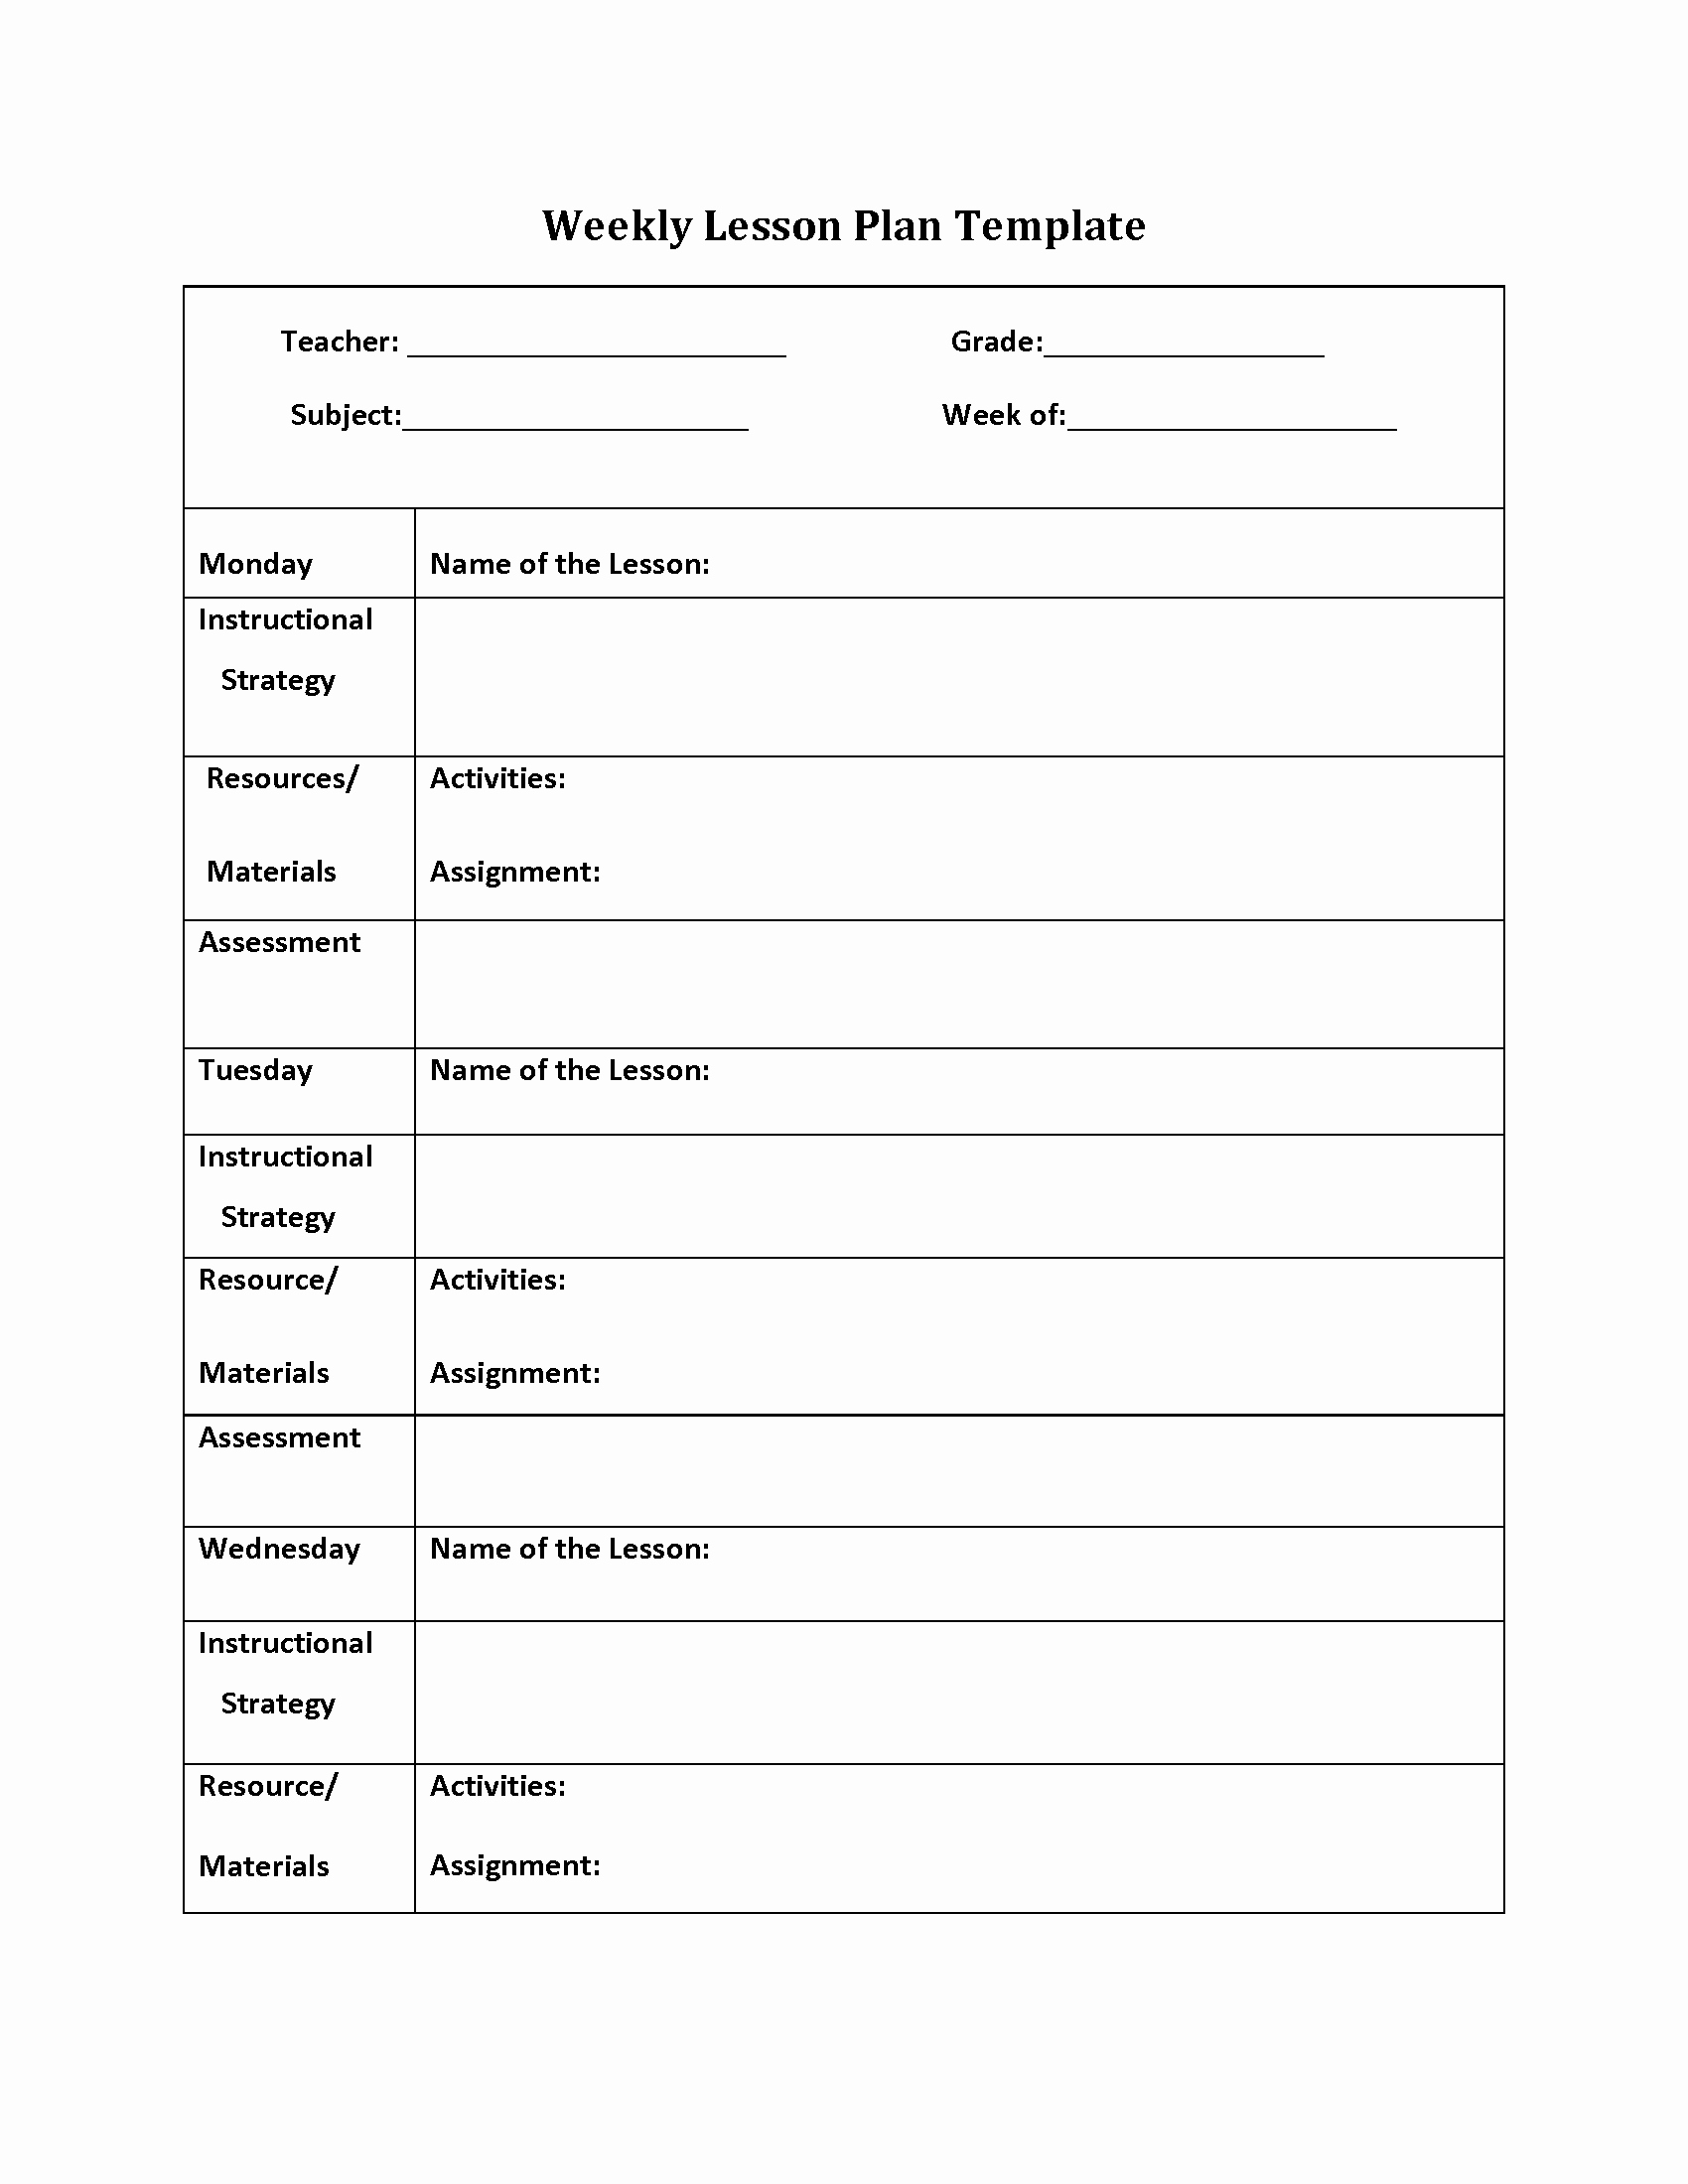 Weekly Lesson Plan Template Doc Inspirational Weekly Lesson Planner Template Excel Plan Microsoft Word